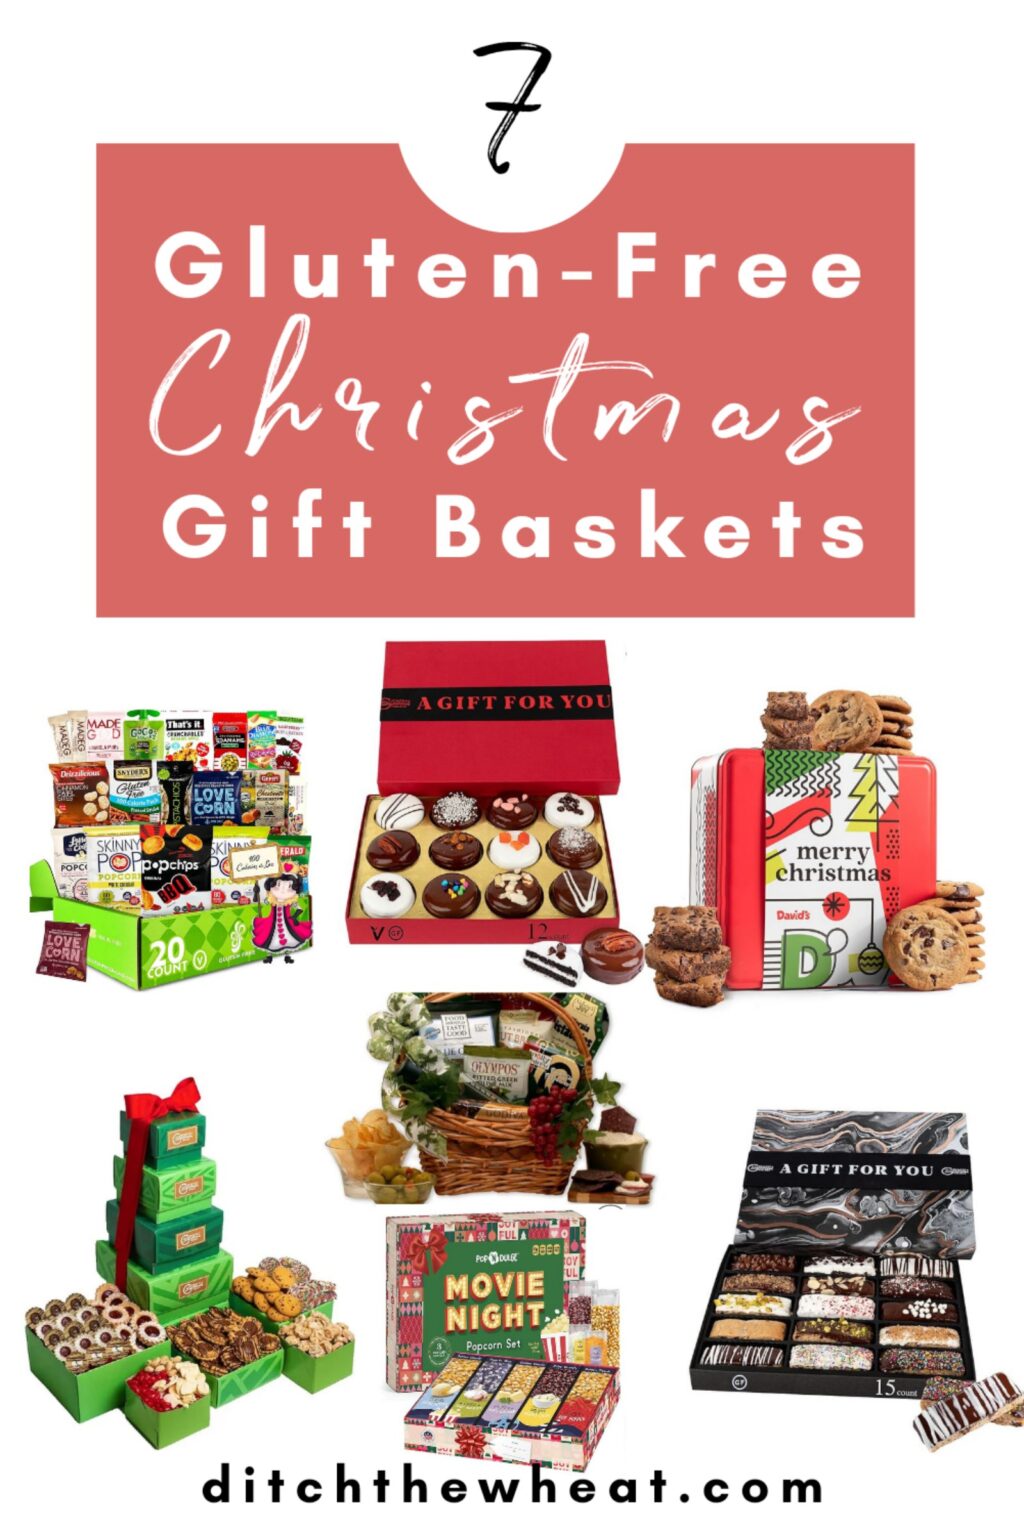 An image with 7 gluten free Christmas baskets.